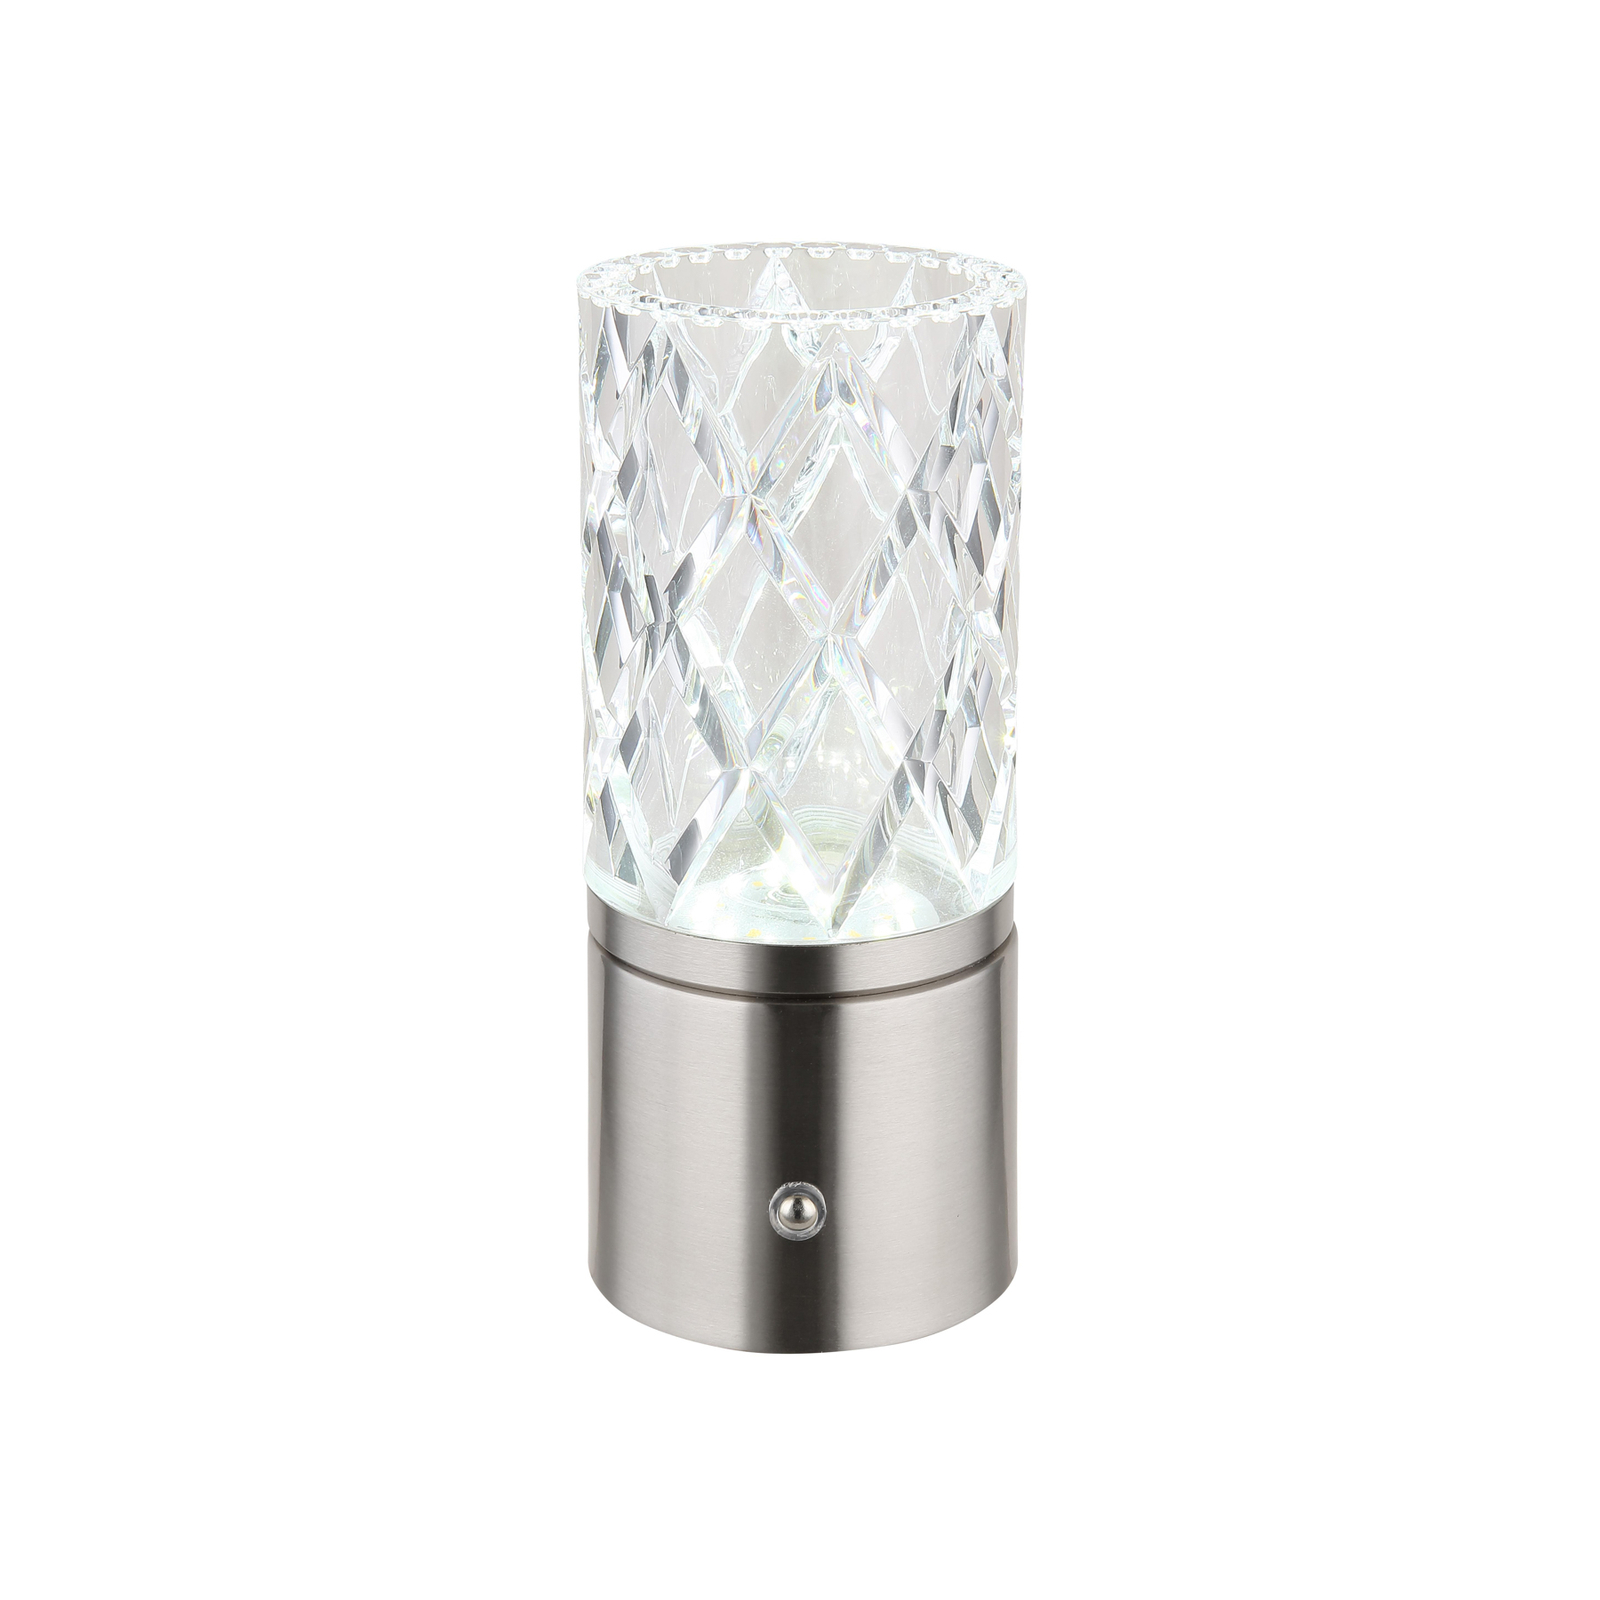 LED table lamp Lunki, nickel-coloured, height 19 cm, CCT